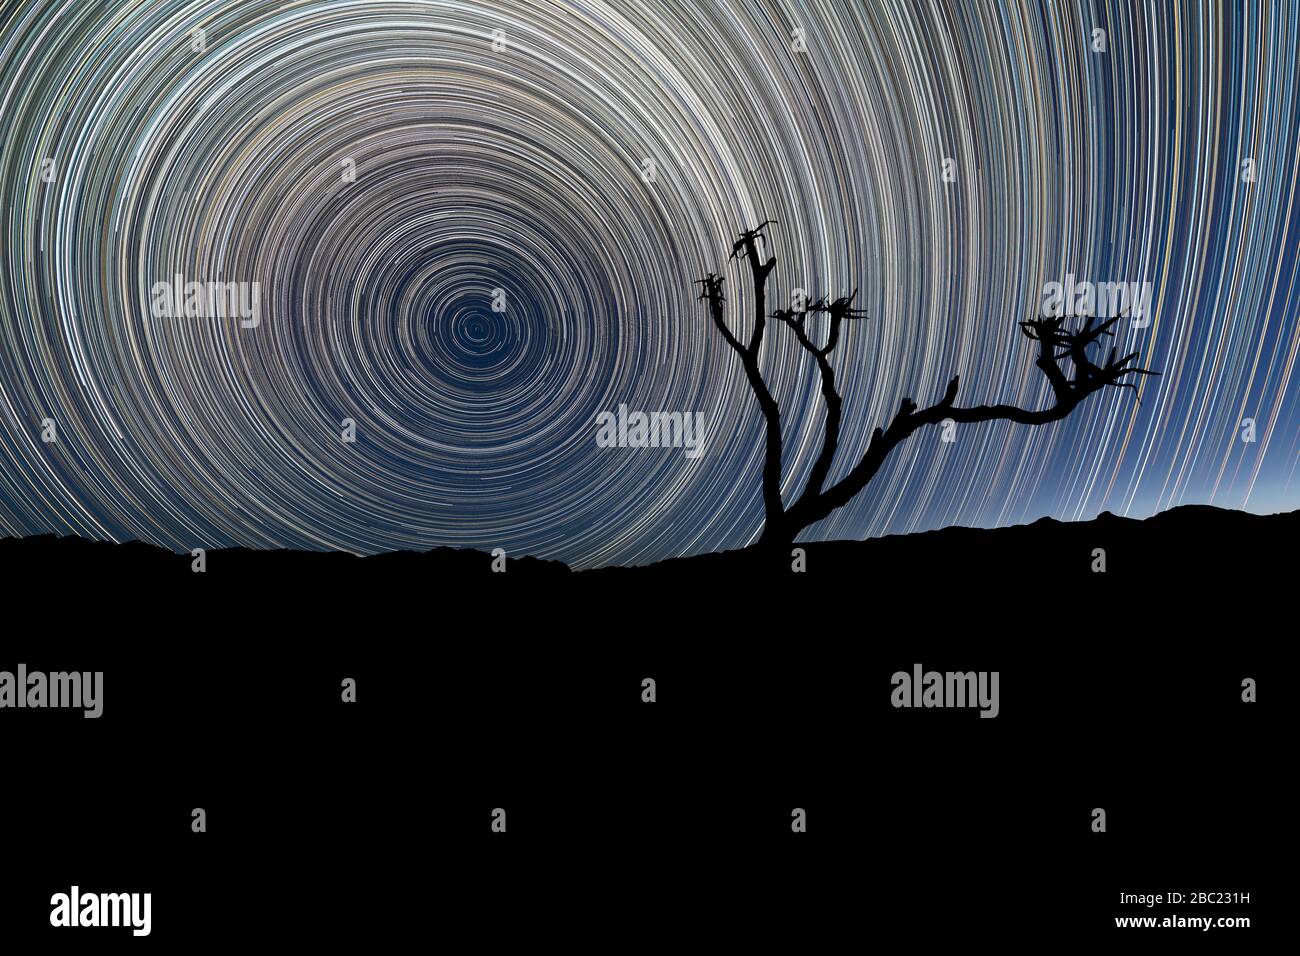 A beautiful night sky landscape with circular star trails, with a Quiver Tree silhouetted in the foreground and mountains on the horizon, in the Richt Stock Photo